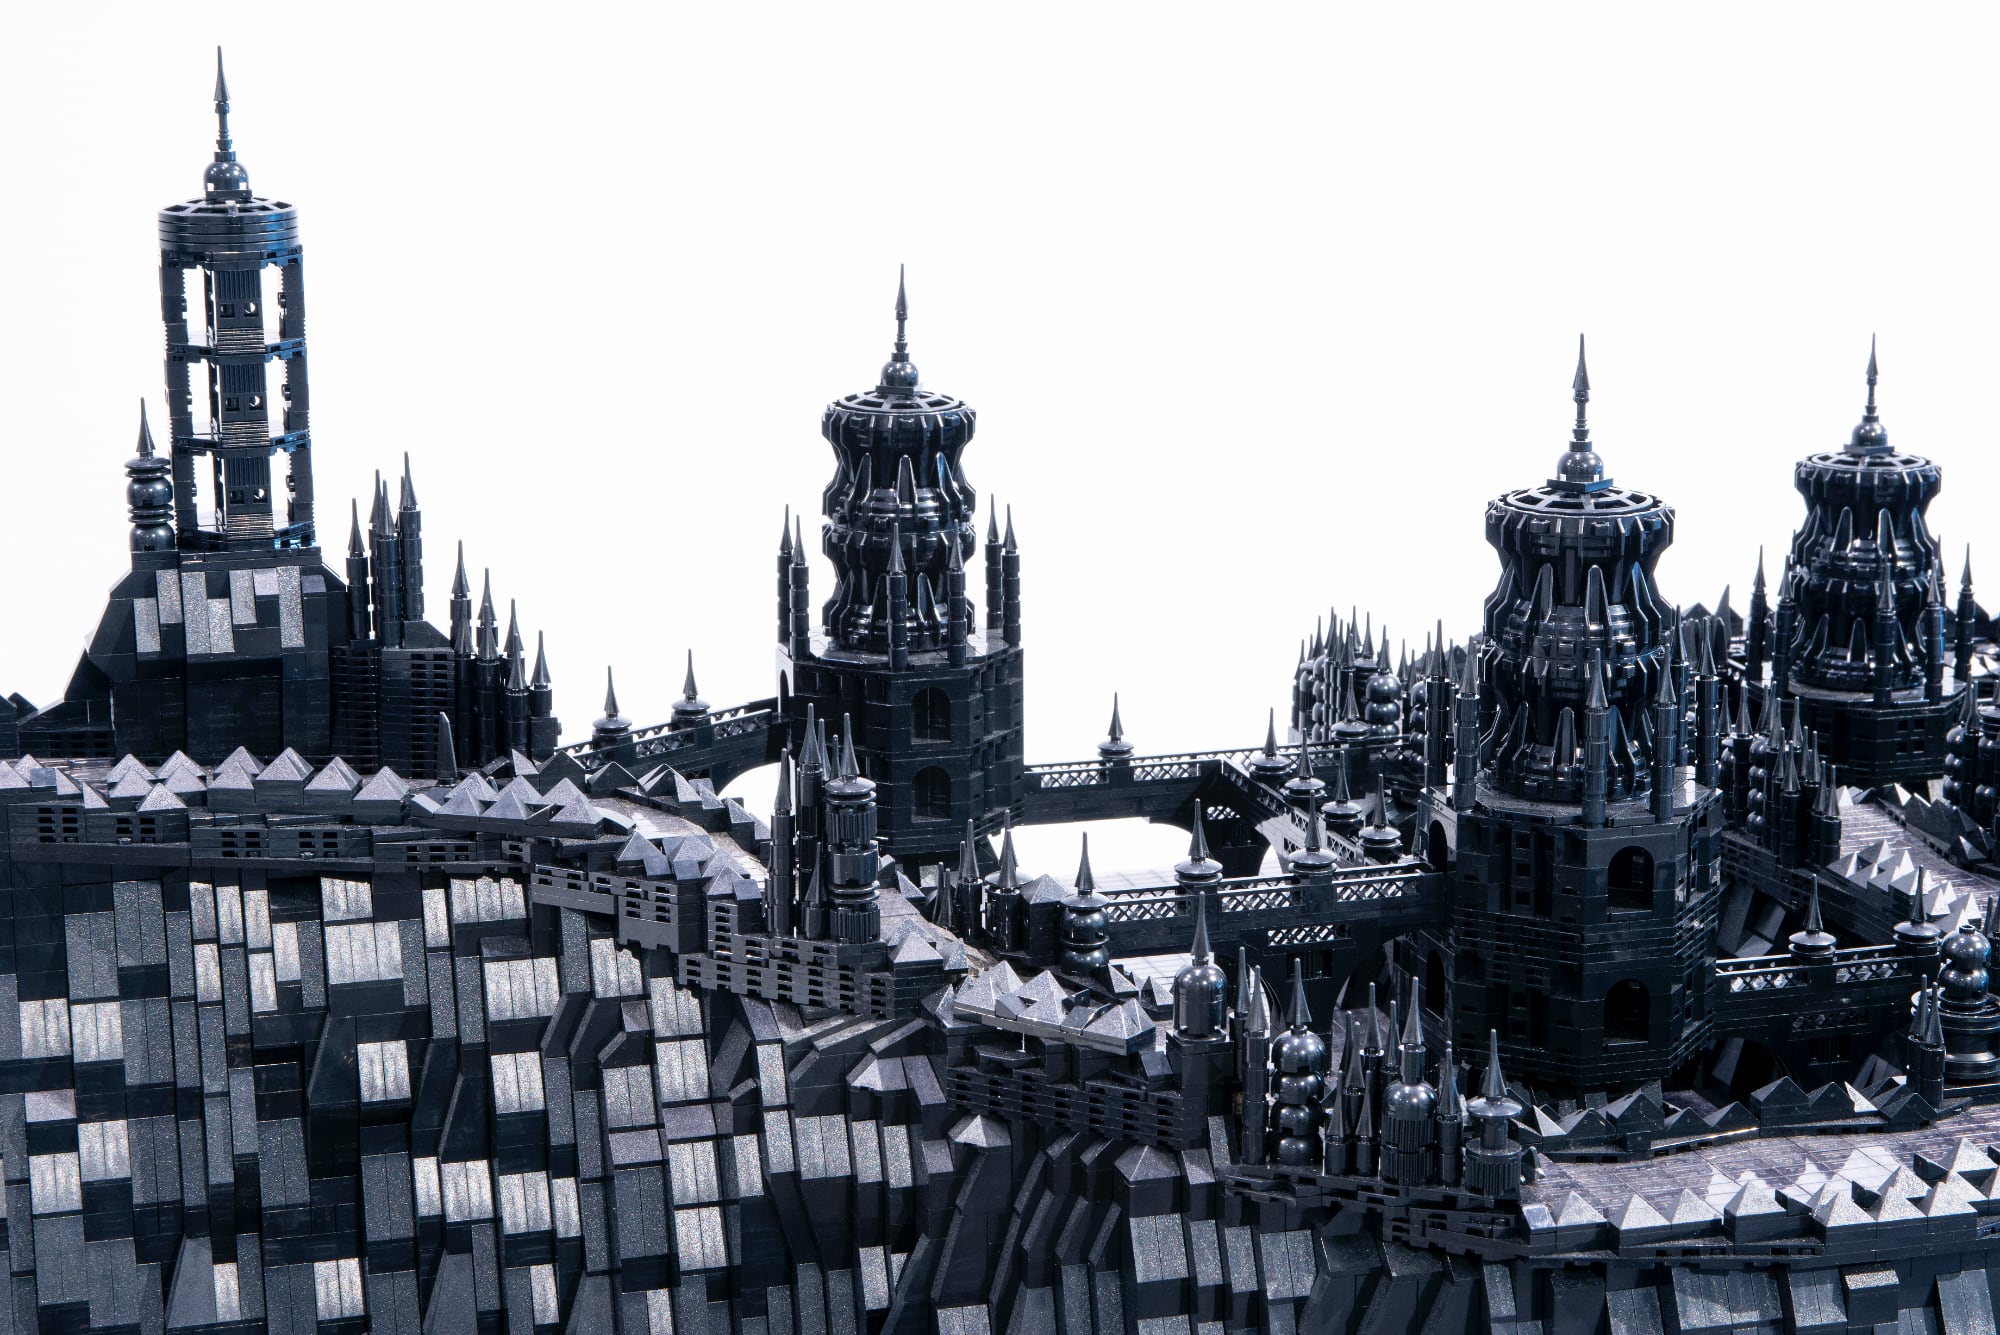 A photo of a detailed cityscape made of black LEGO